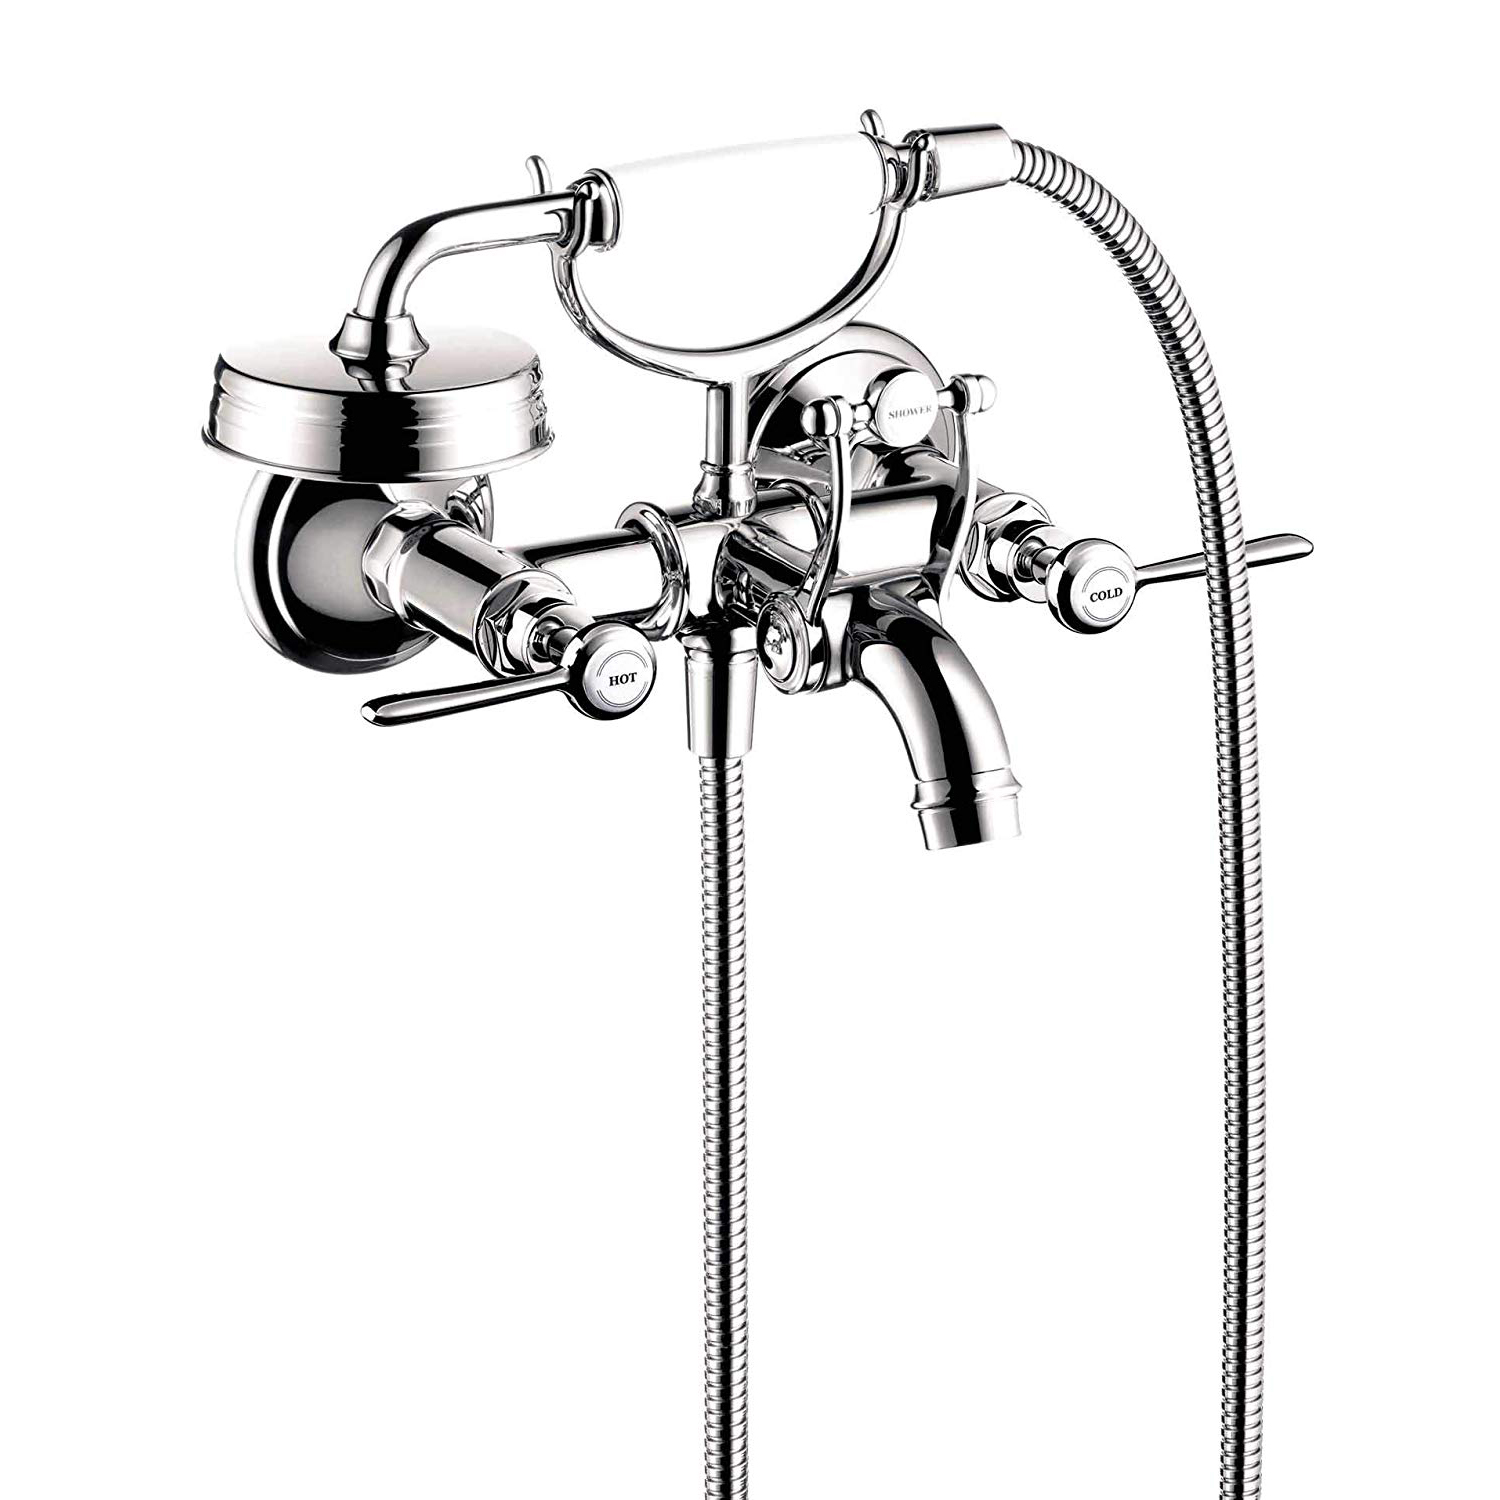 Axor Montreux Wall Mnt Tub Filler w/Lever Hdls in Polished Nickel